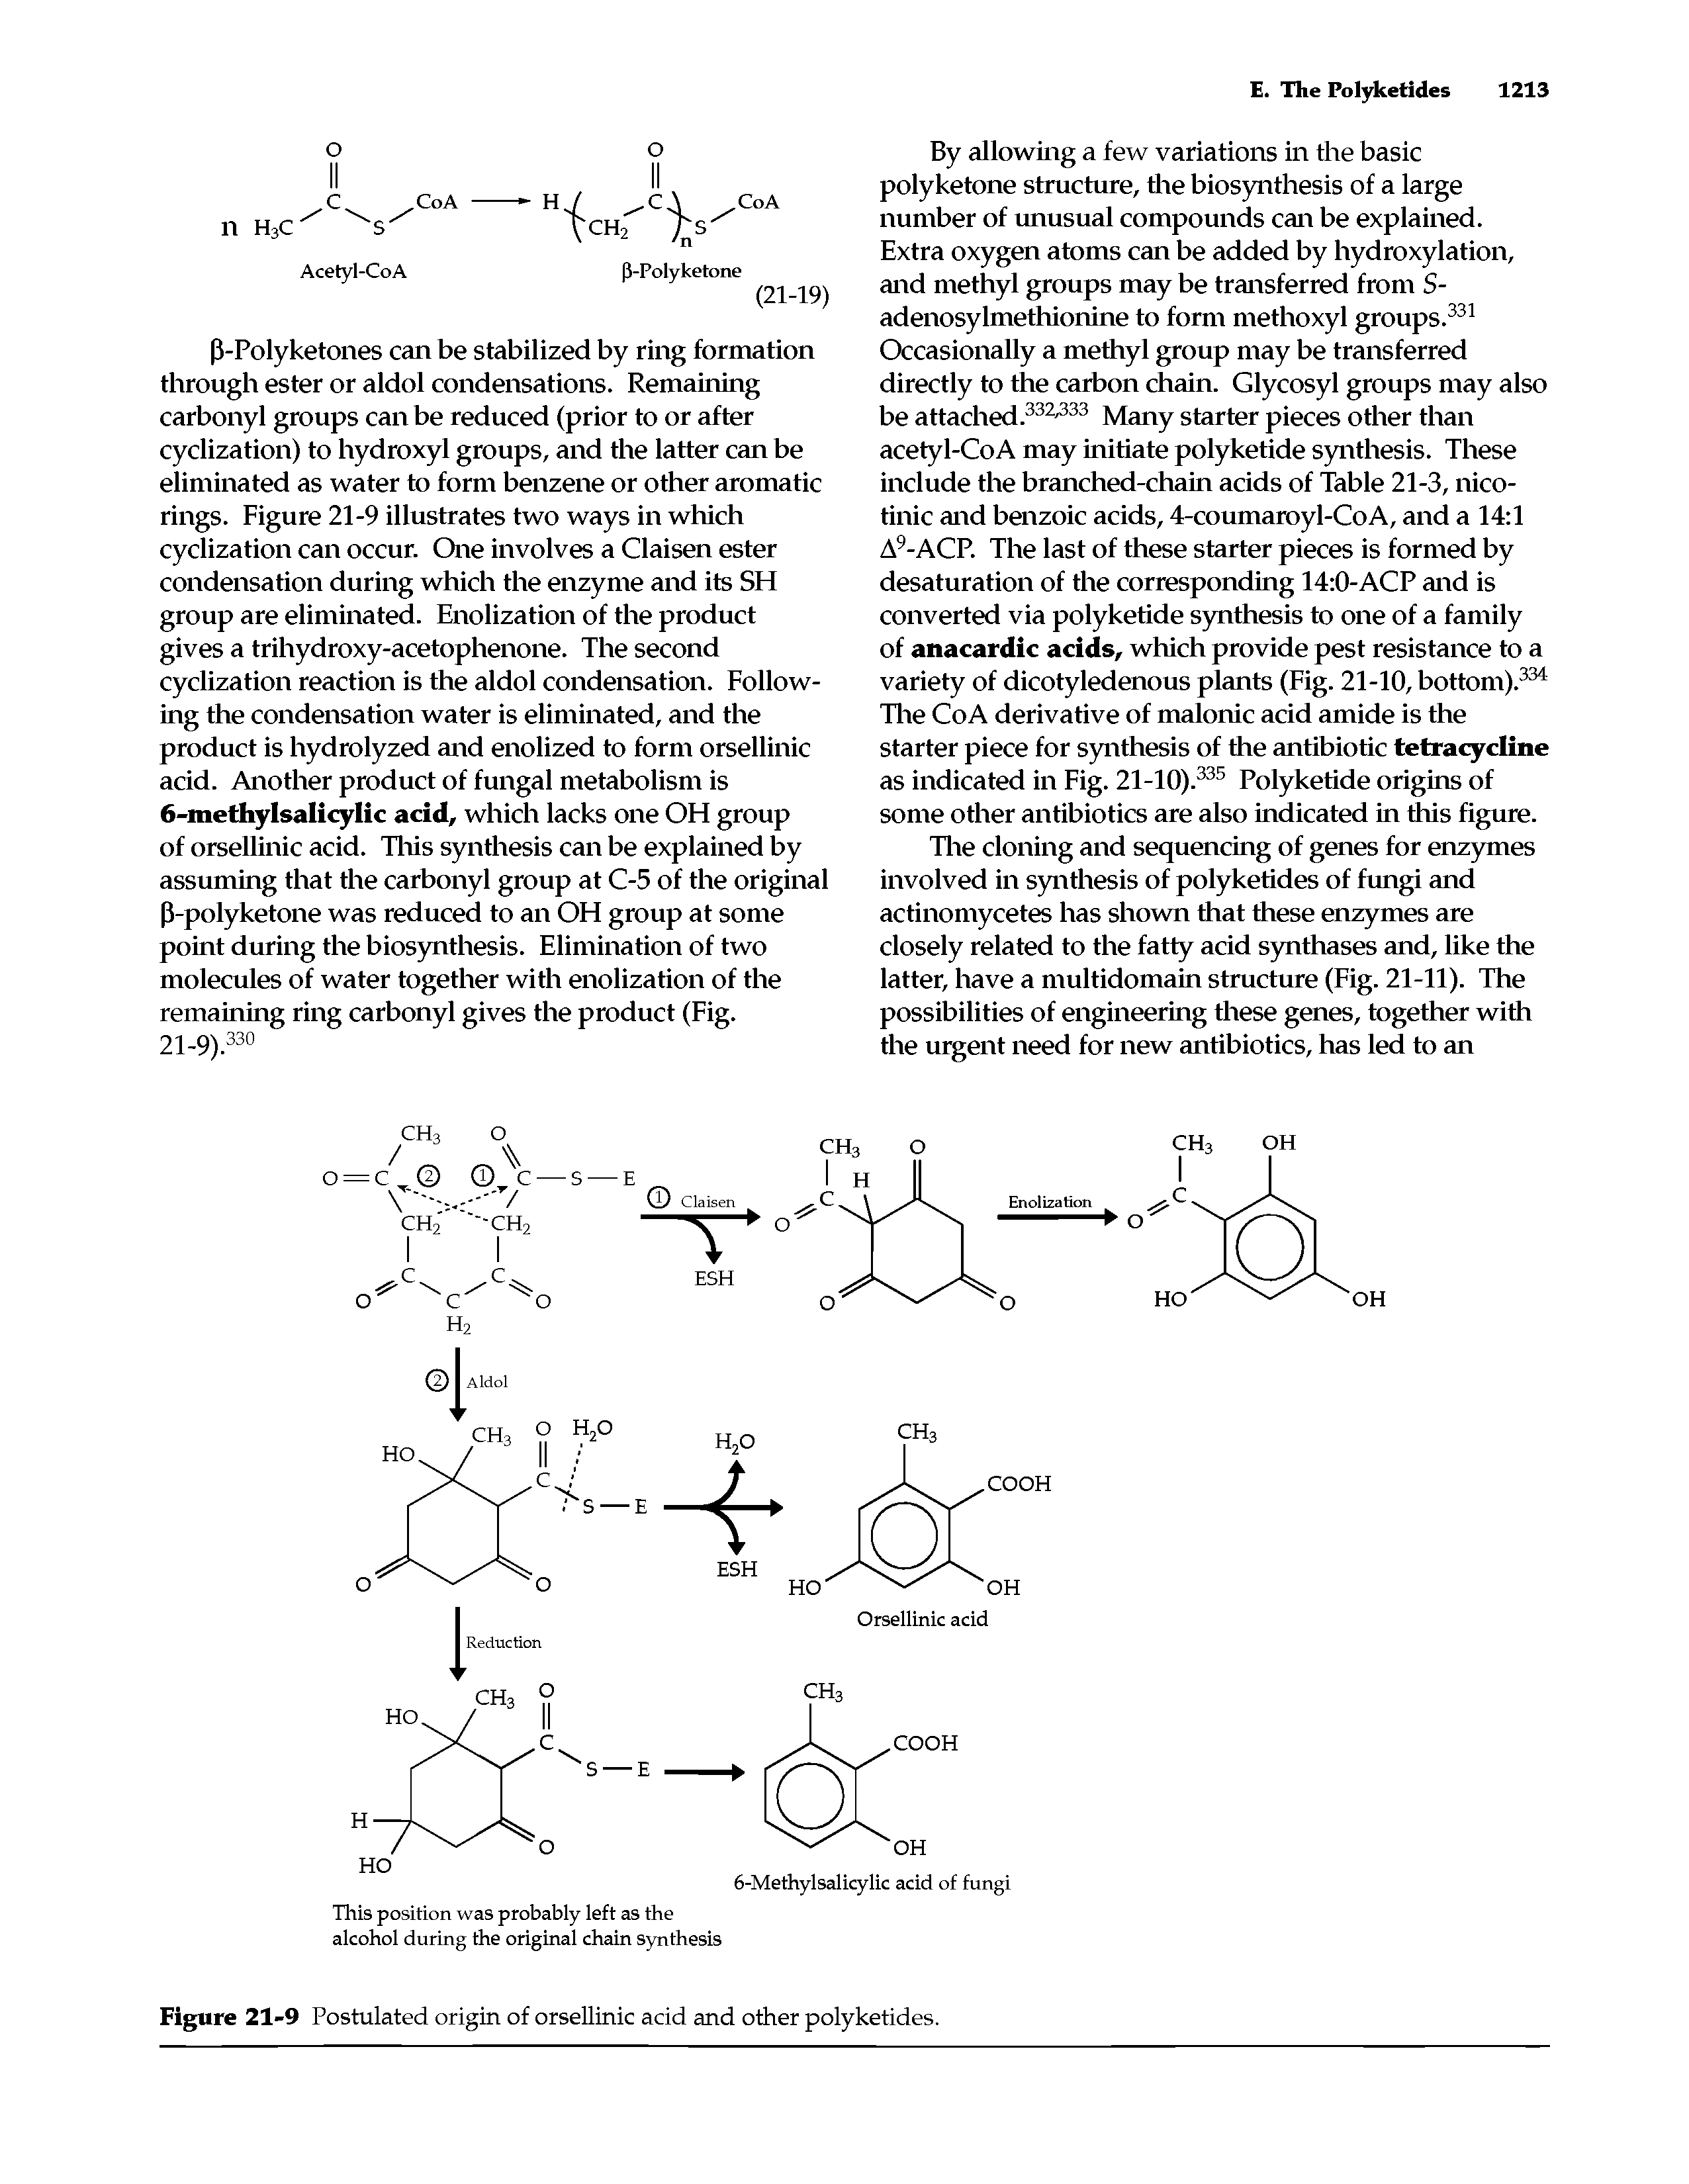 Figure 21-9 Postulated origin of orsellinic acid and other polyketides.